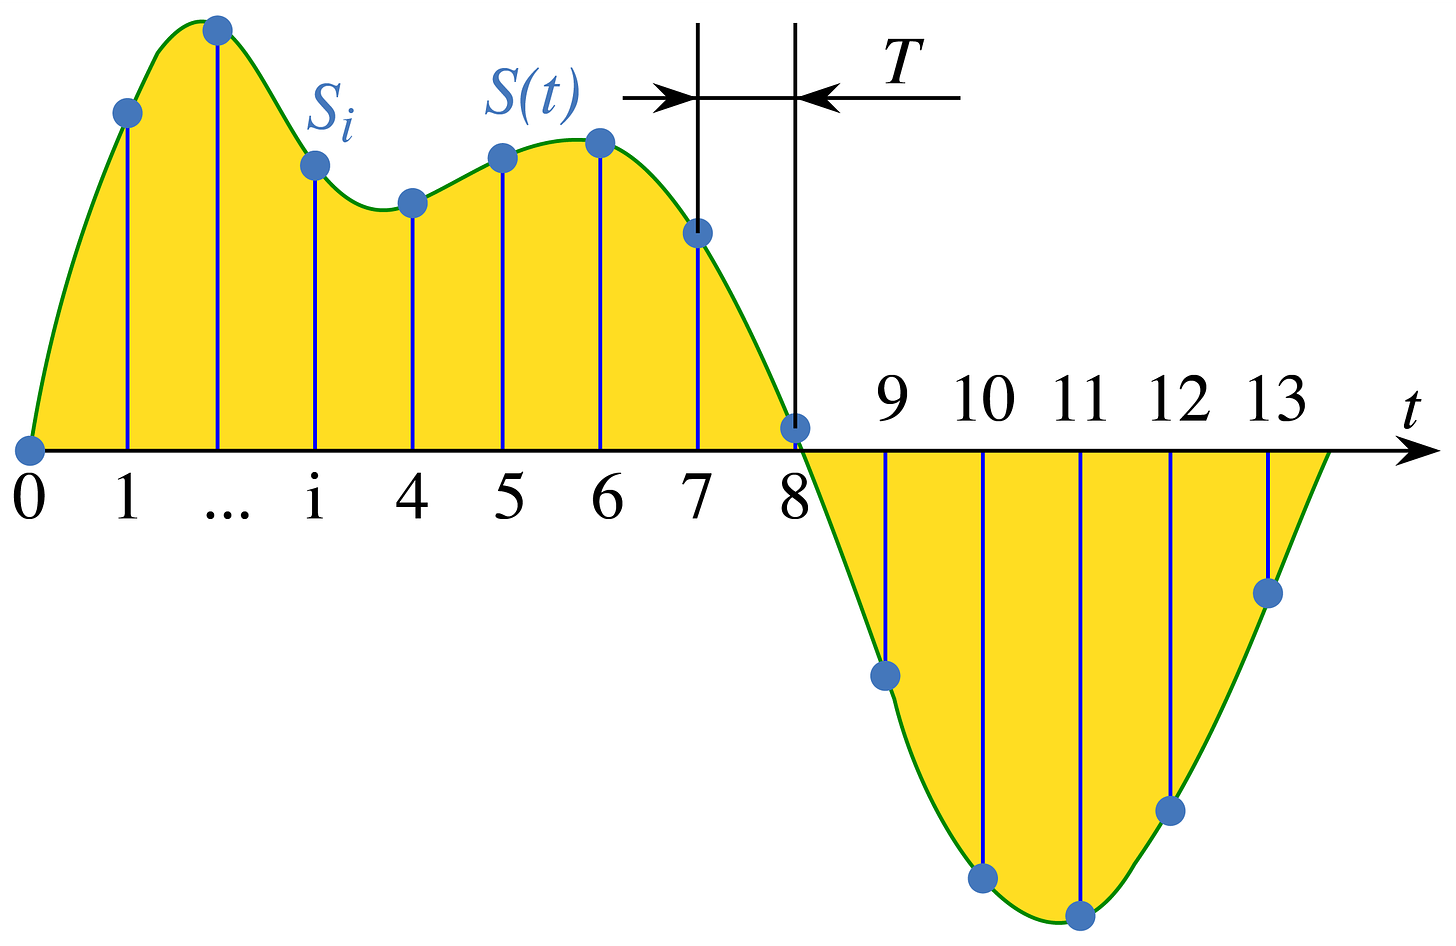 Signal sampling representation. The continuous signal S(t) is represented with a green colored line while the discrete samples are indicated by the blue vertical lines.